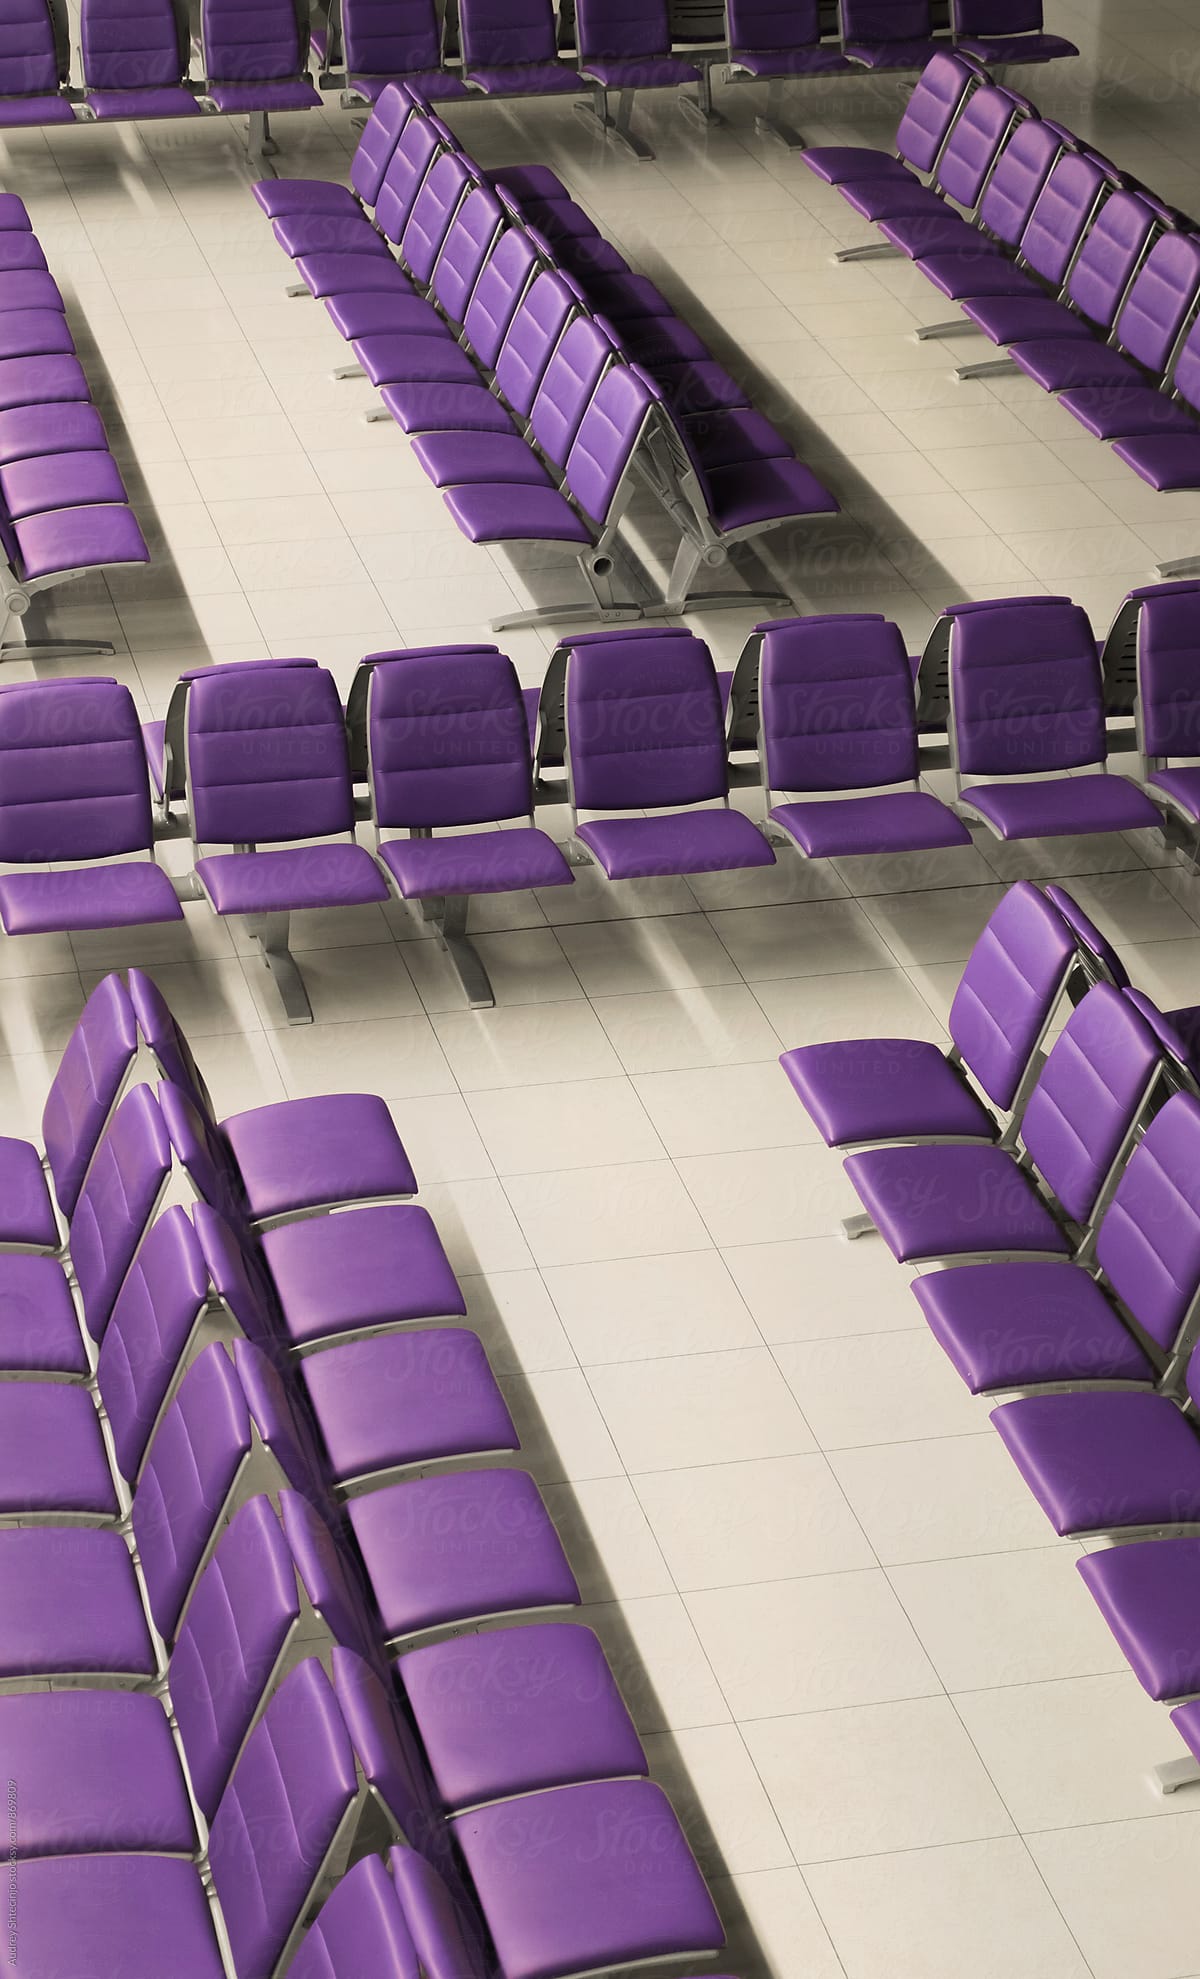 Empty purple chairs on airport